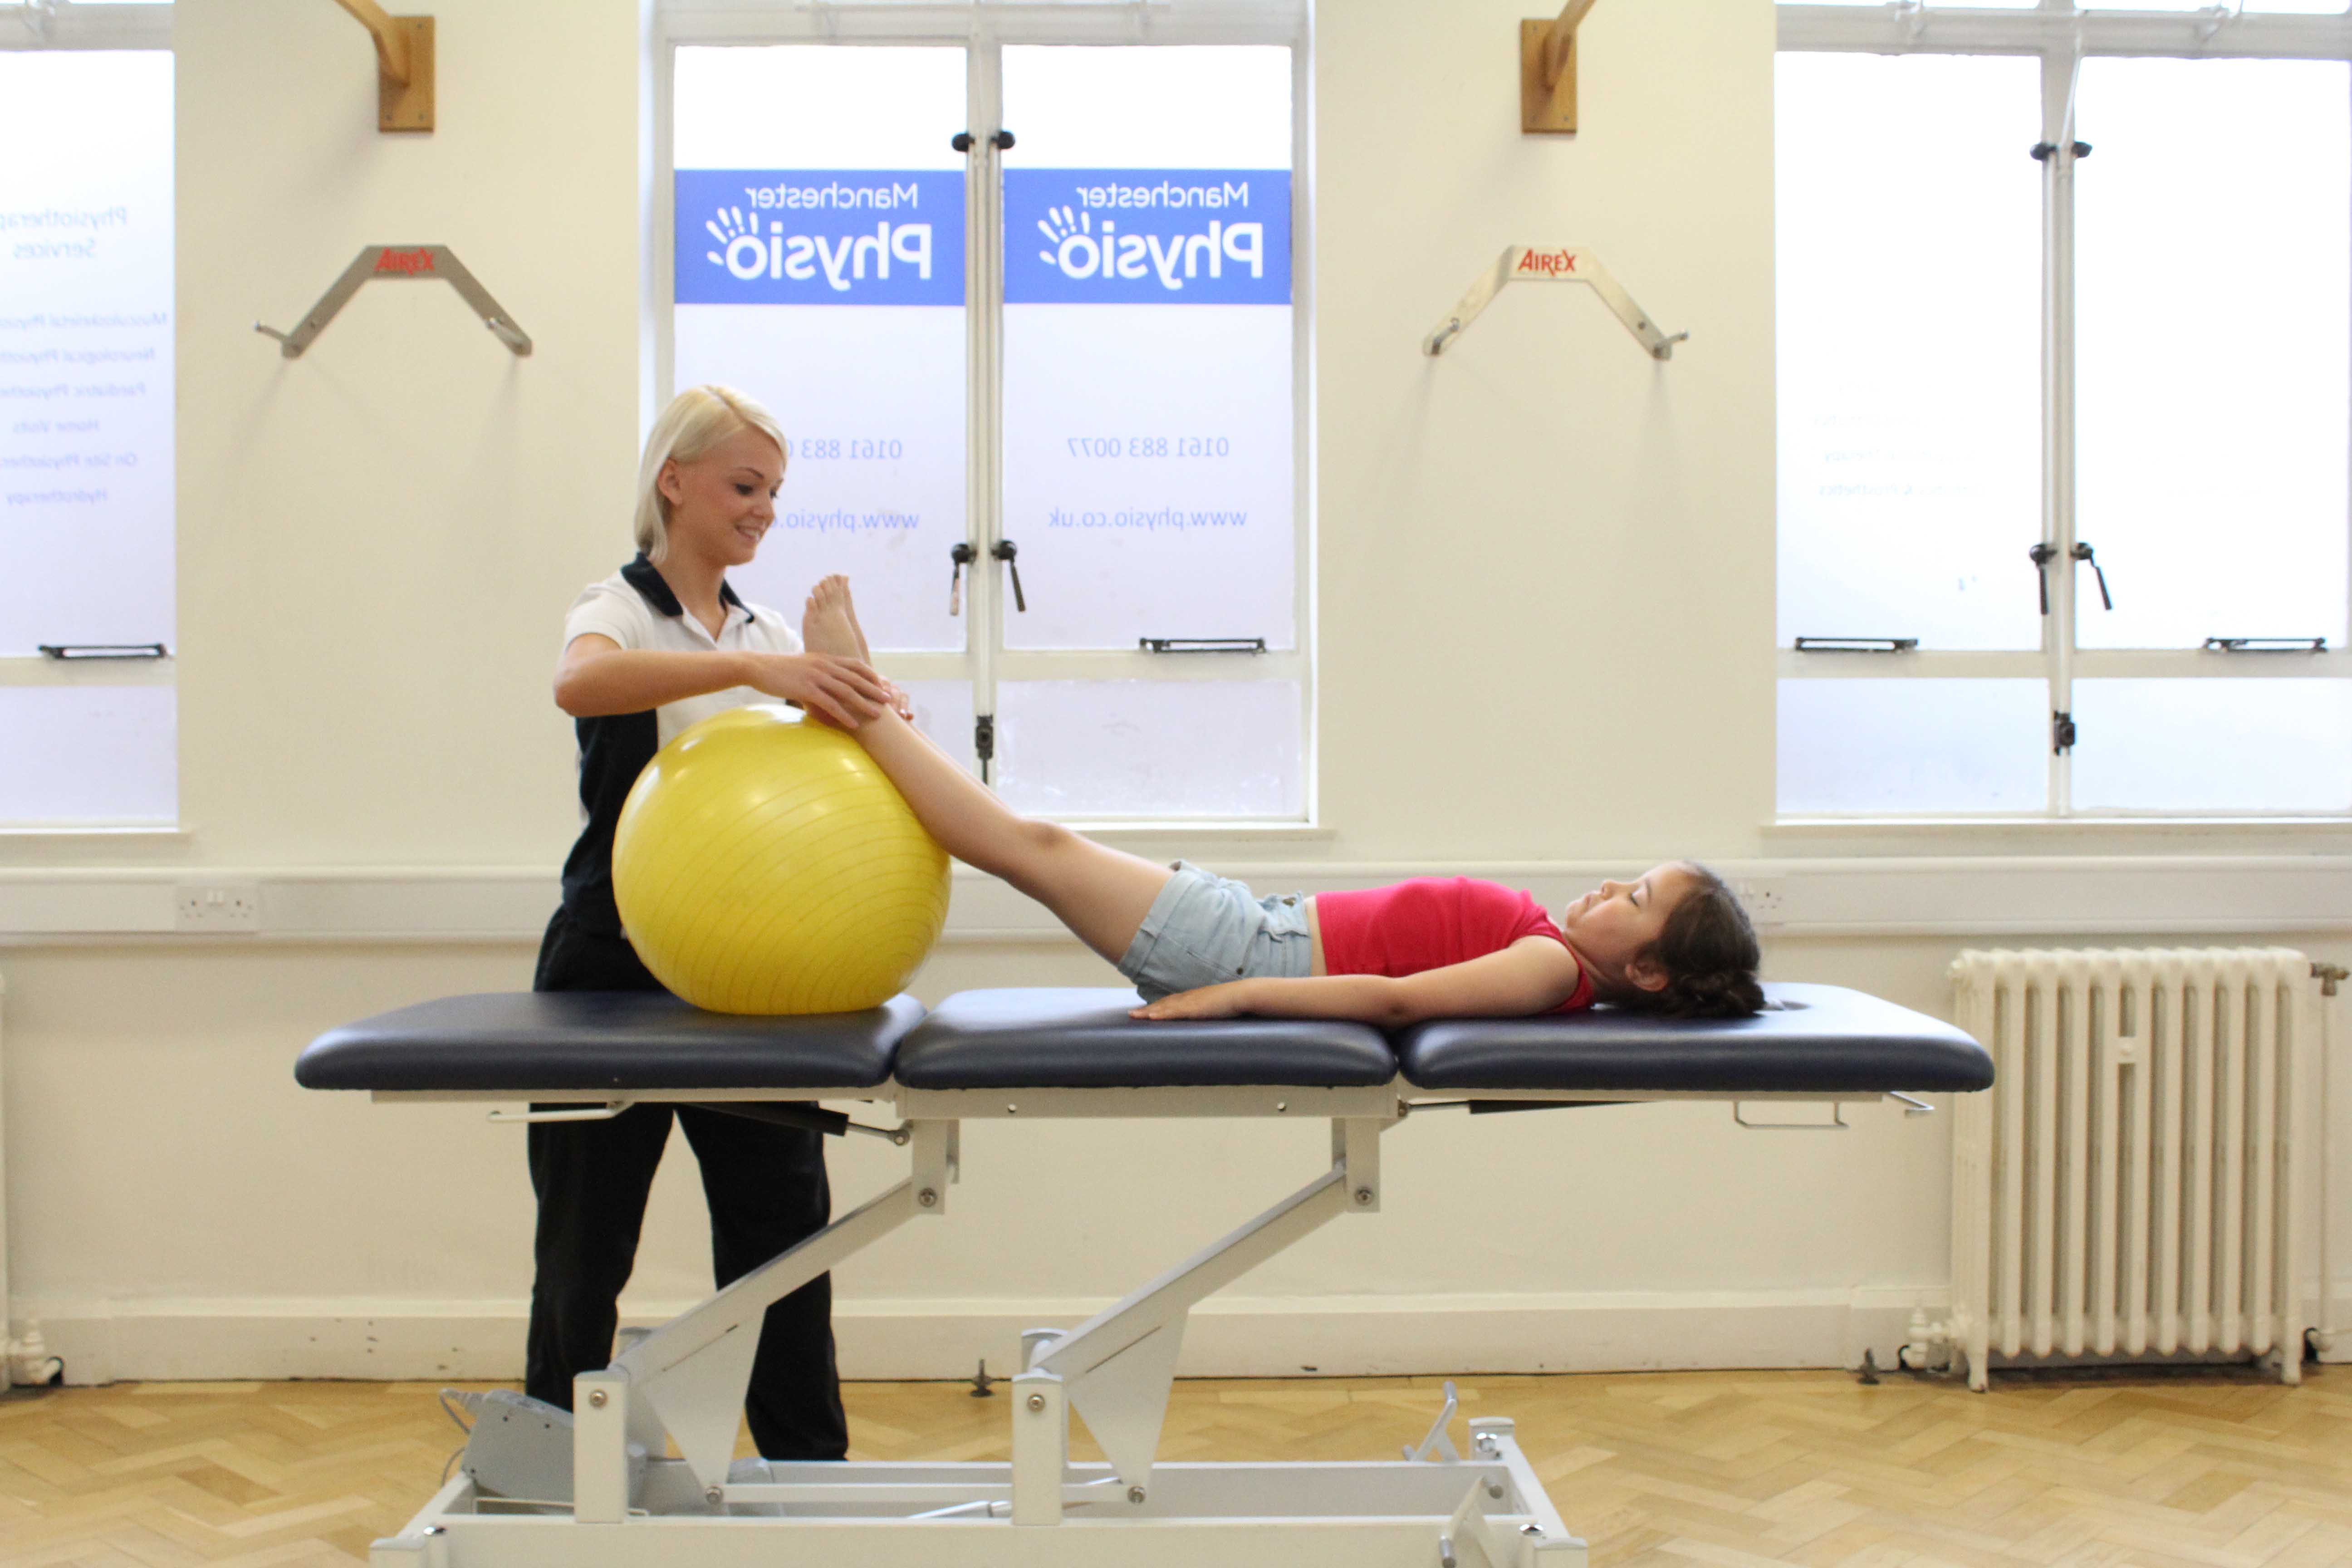 Massage and mobilisation of the knees to relieve pain and stiffness